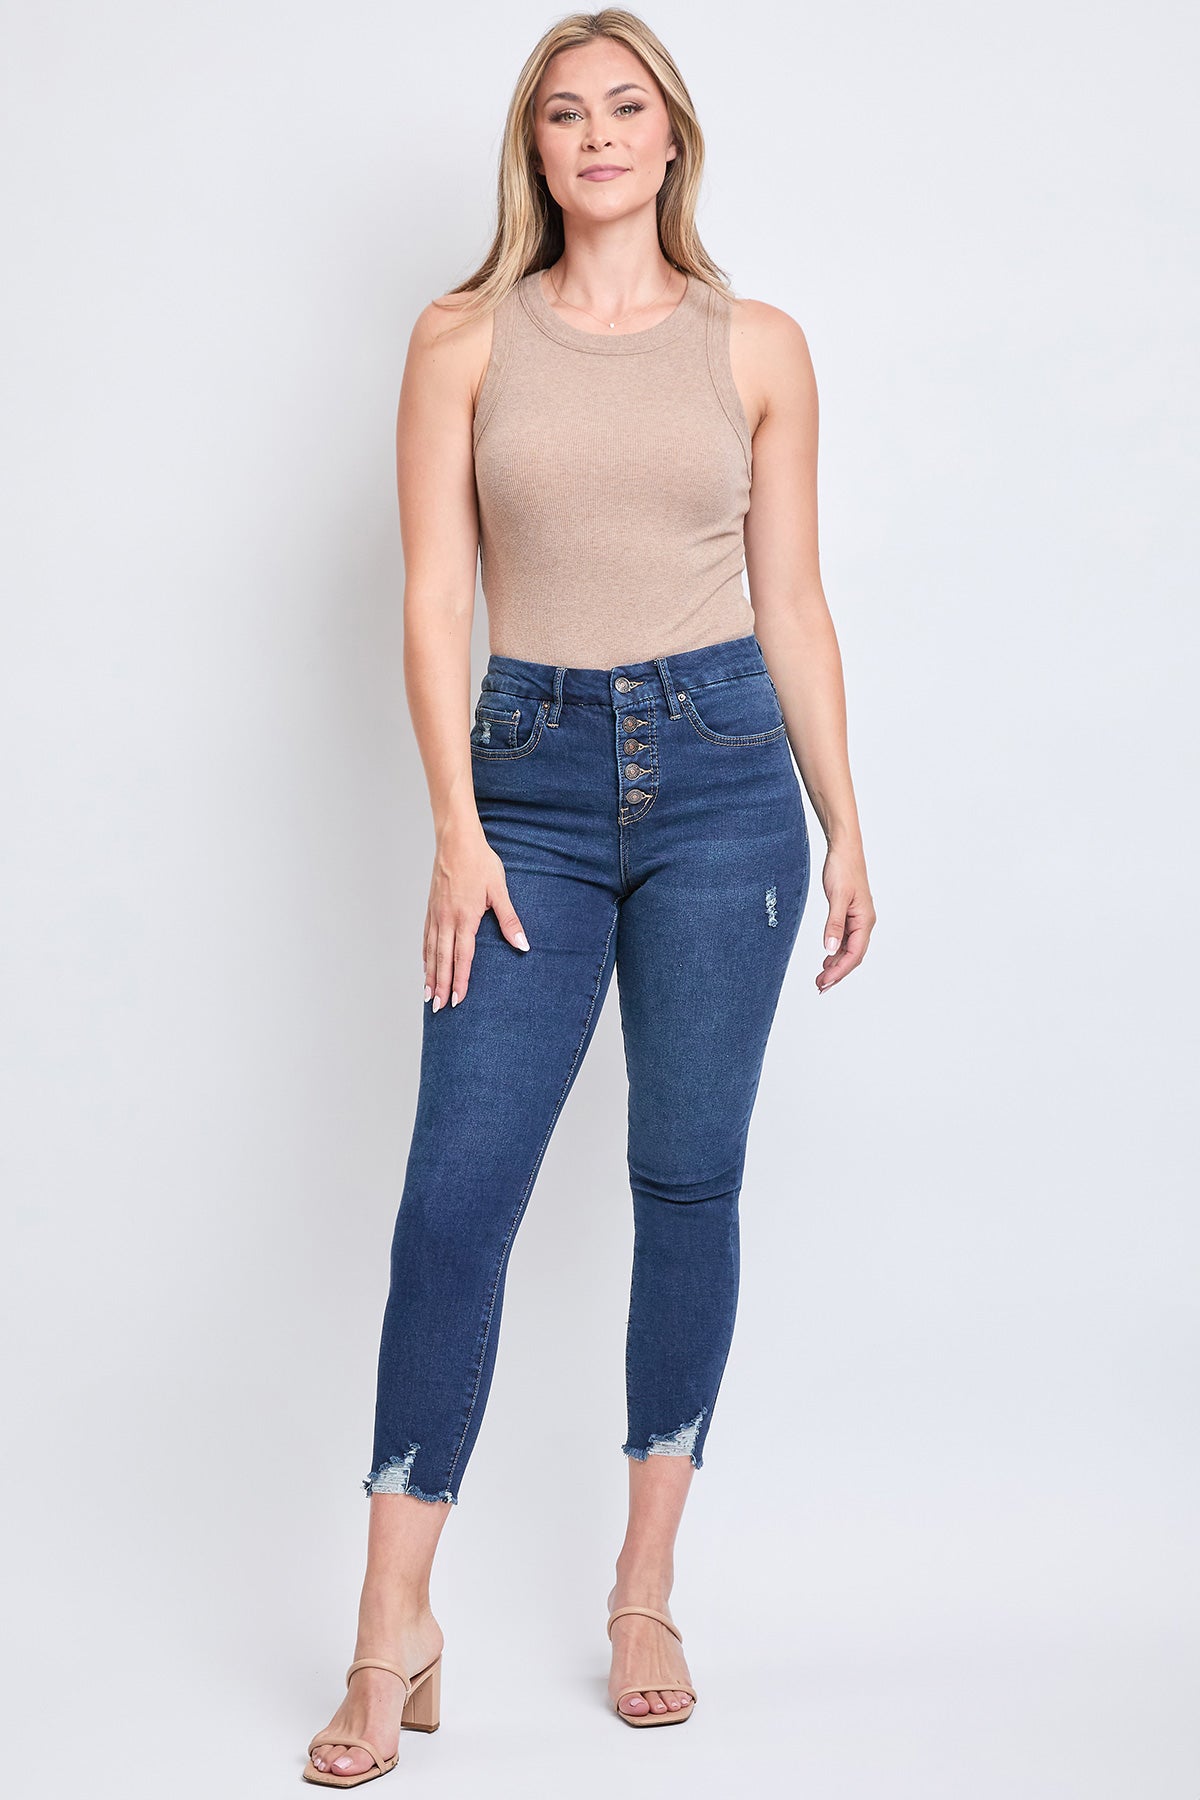 Women's Sustainable Curvy Fit Tummy Control Jean